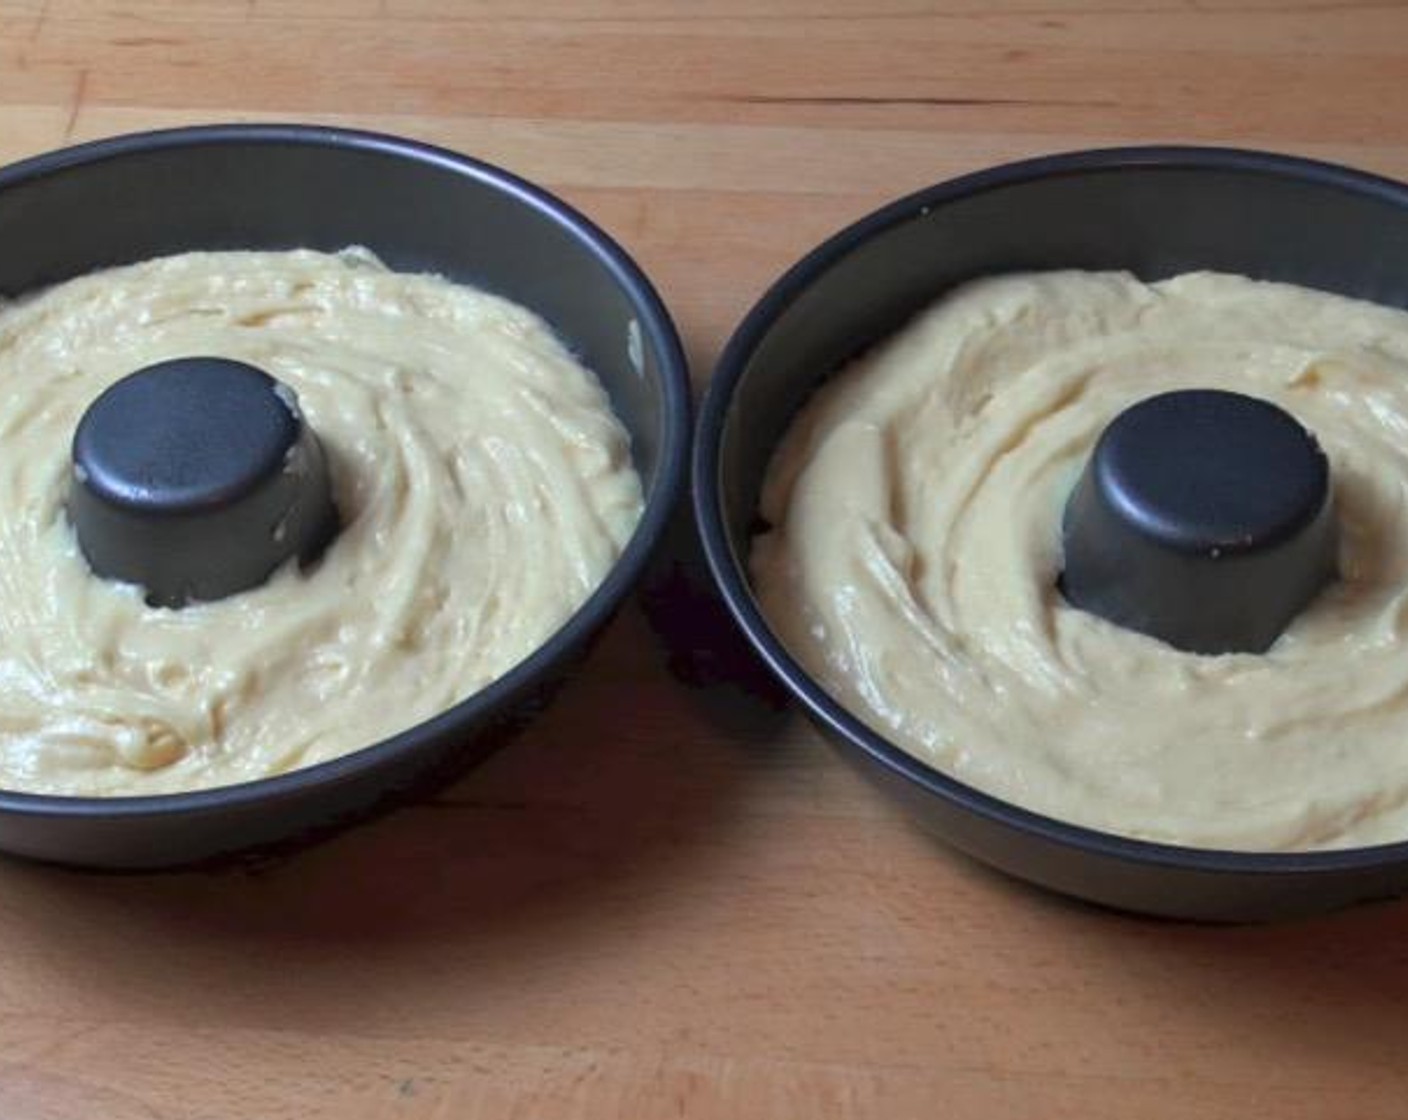 step 4 Divide the batter into two large donut cake tins, lightly greased.